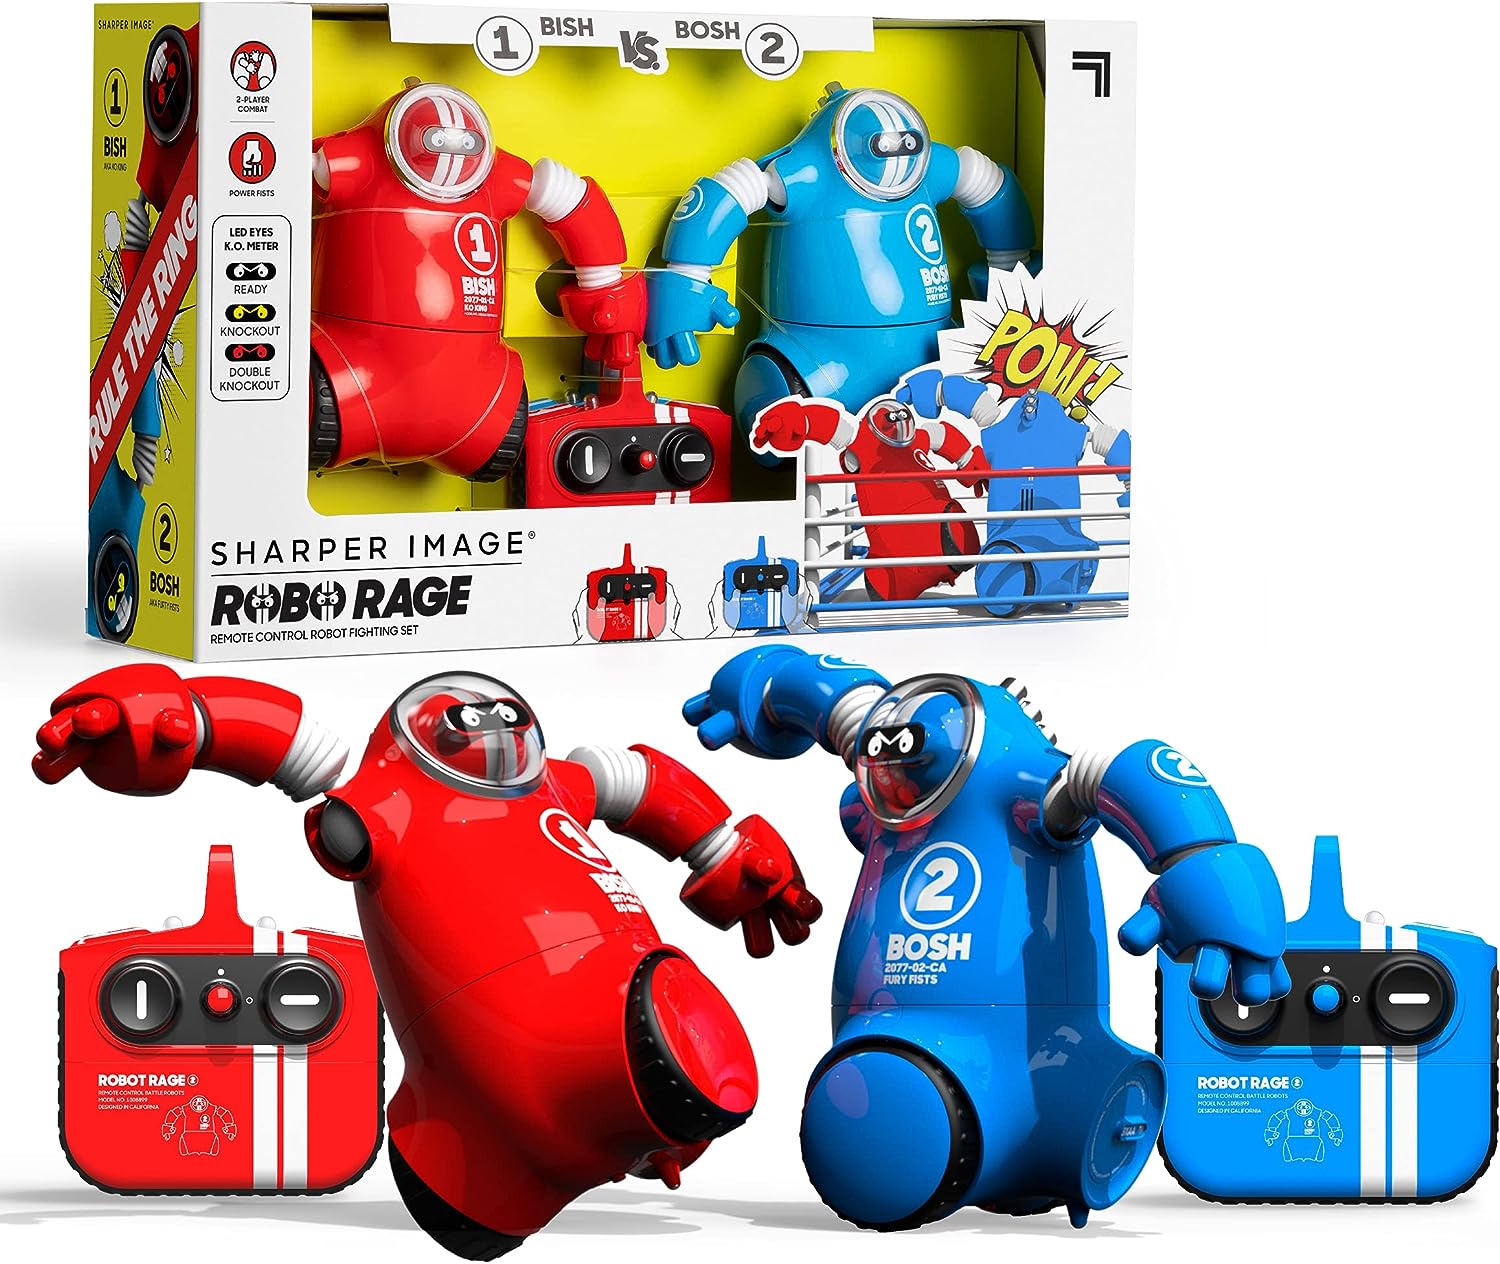 Unleashing Robo Fury: A Review of the Sharper Image Robo Rage Remote Control Robot Fighting Set